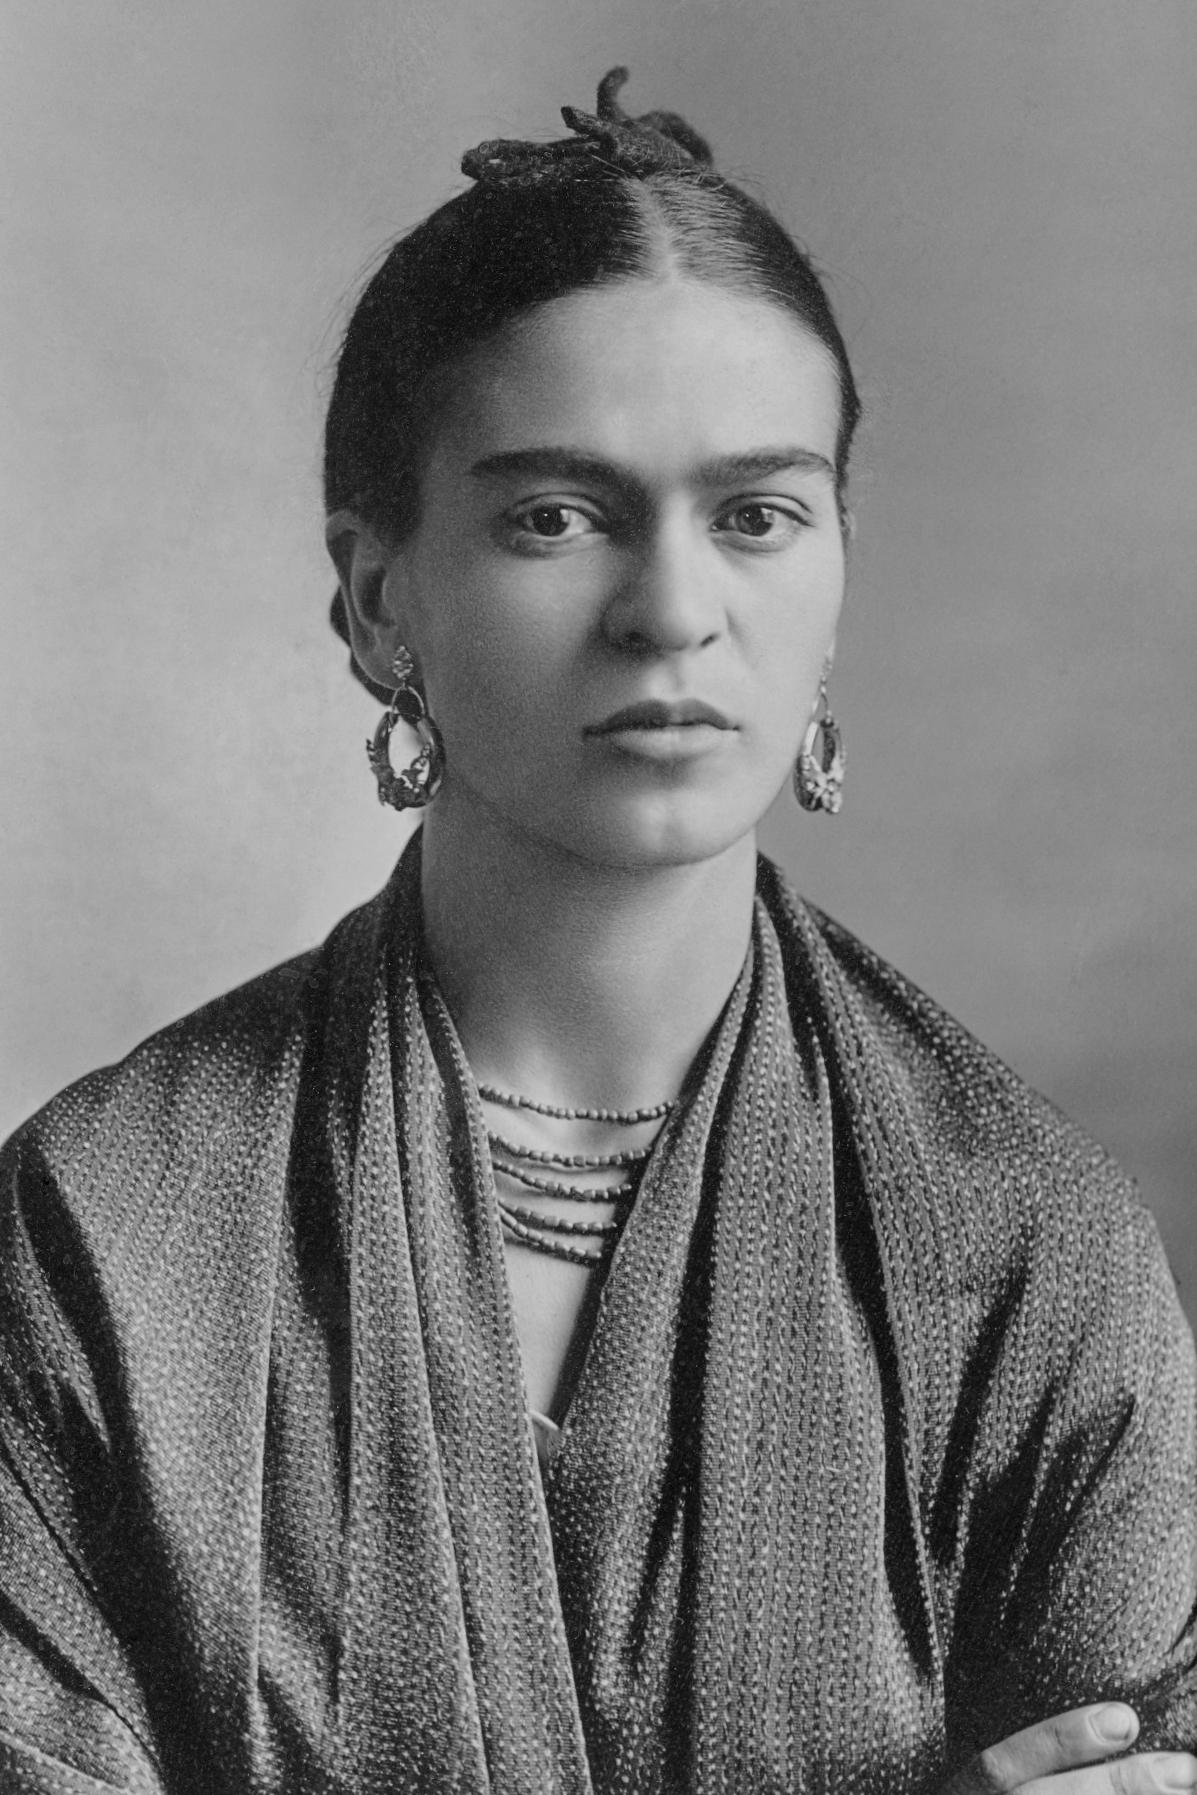 Image portrait of Frida Kahlo as a young woman